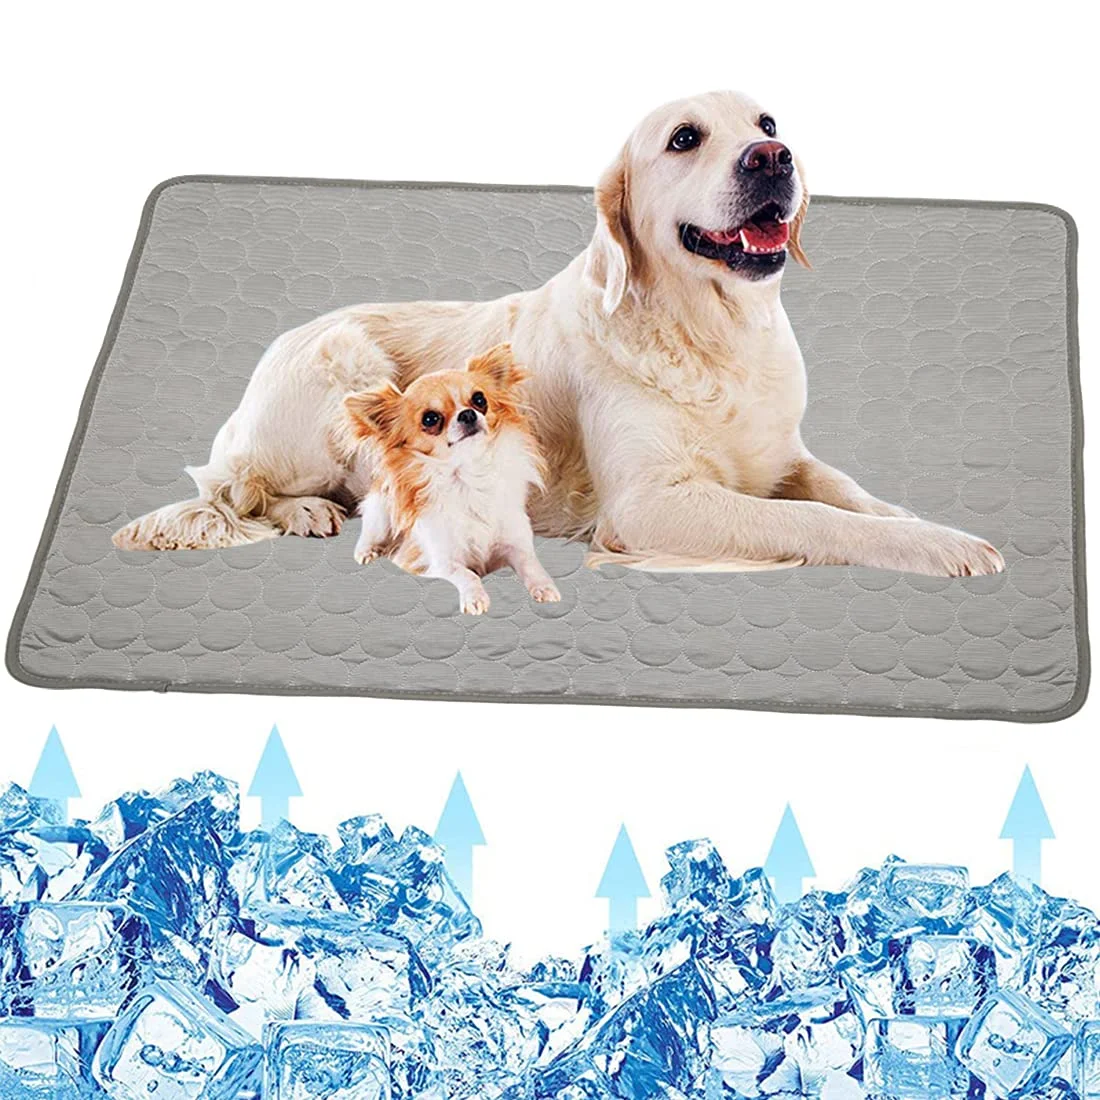 

Dog Cooling Mat, Pet Dog Self Cooling Pad, Ice Silk Washable Summer Cool Mat for Cats, Kennels, Crates and Beds